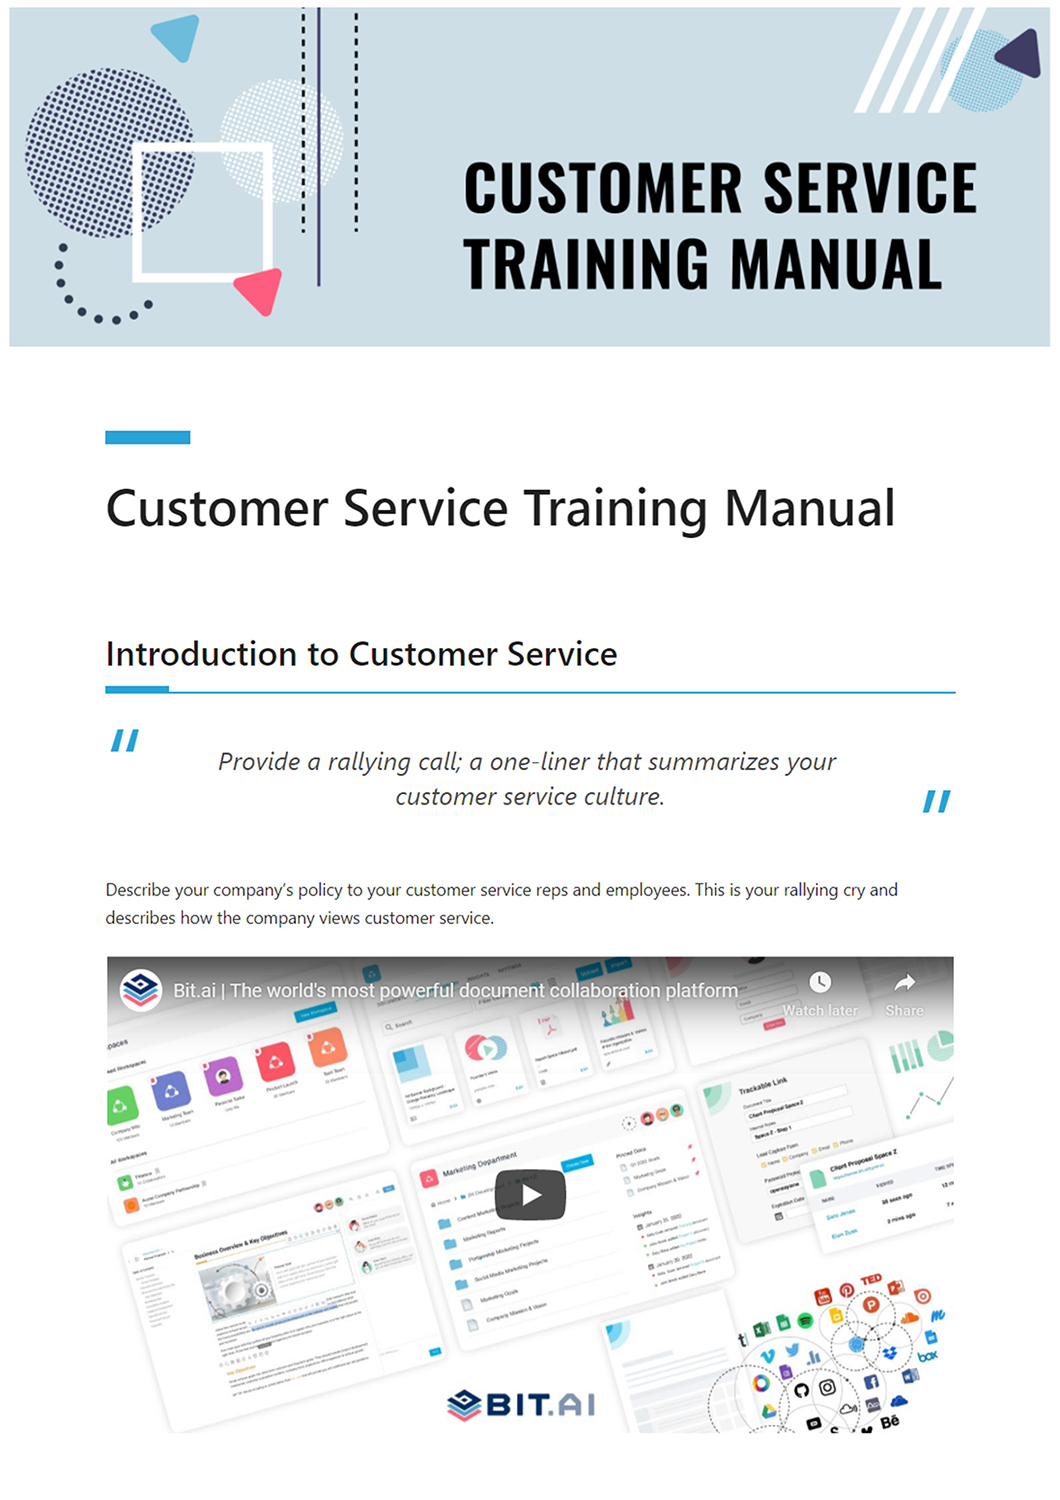 How to Create a Customer Service Training Manual Easily?